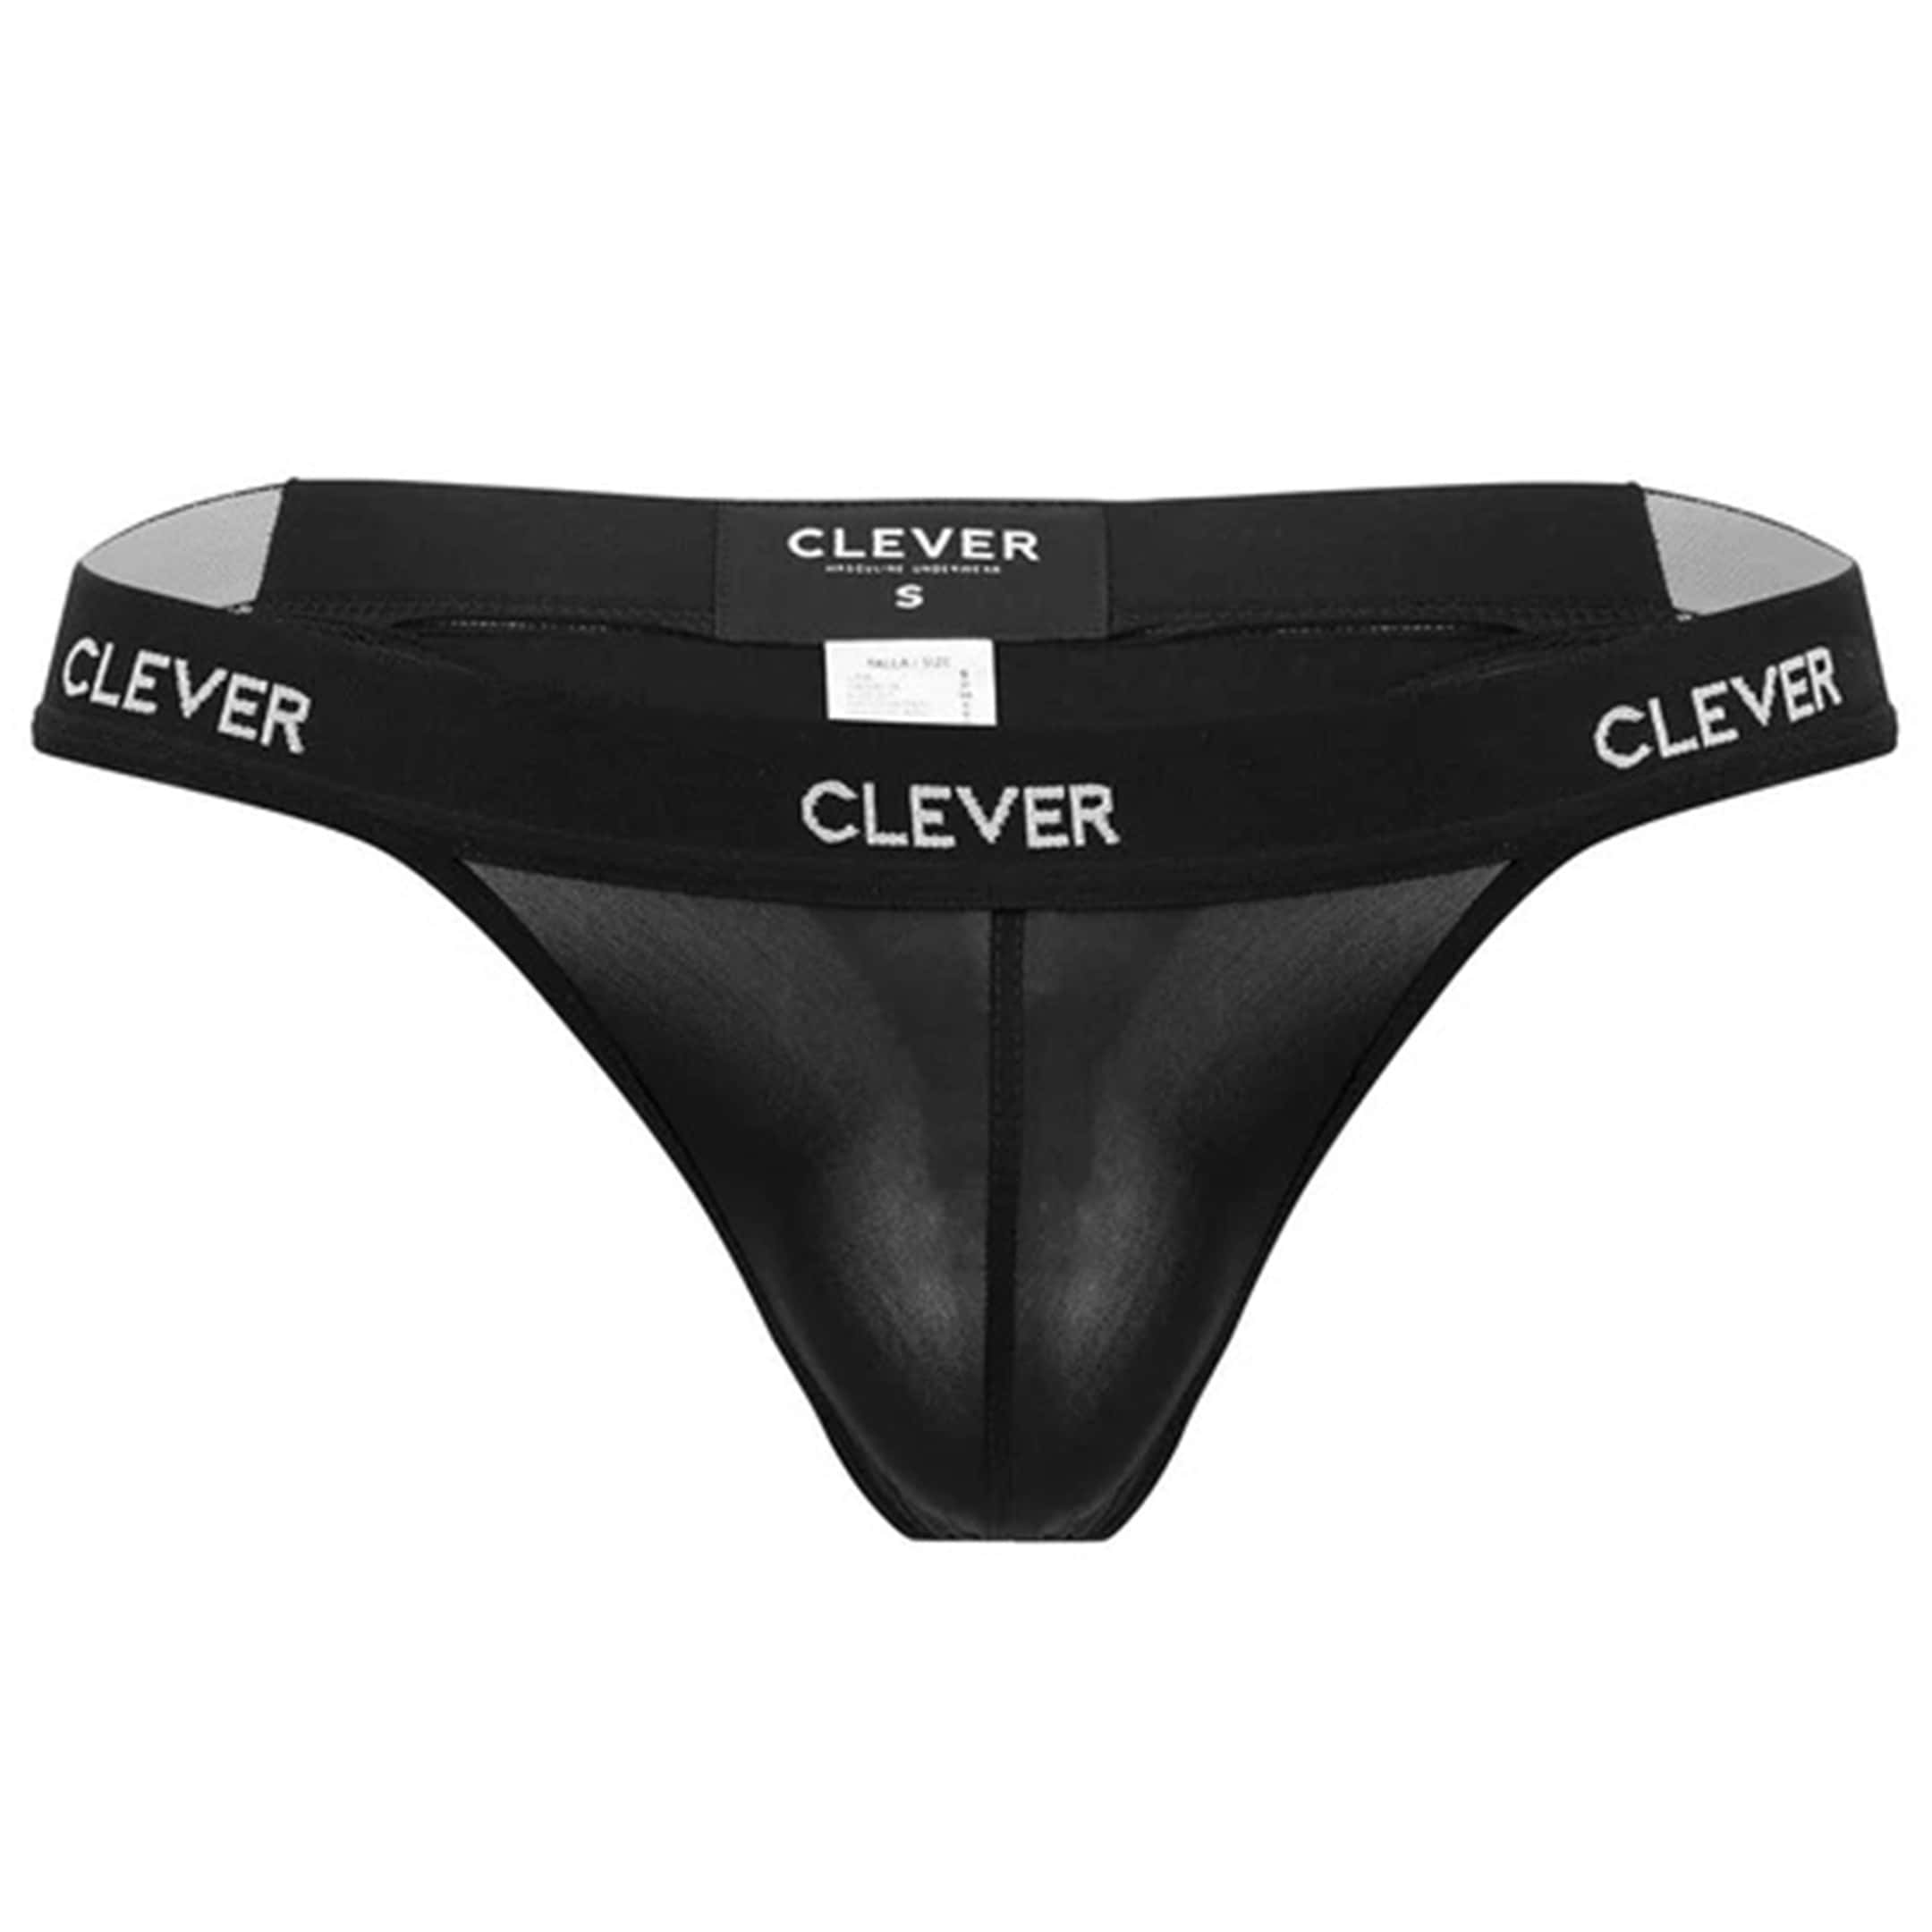 About the Brand: Clever Moda 